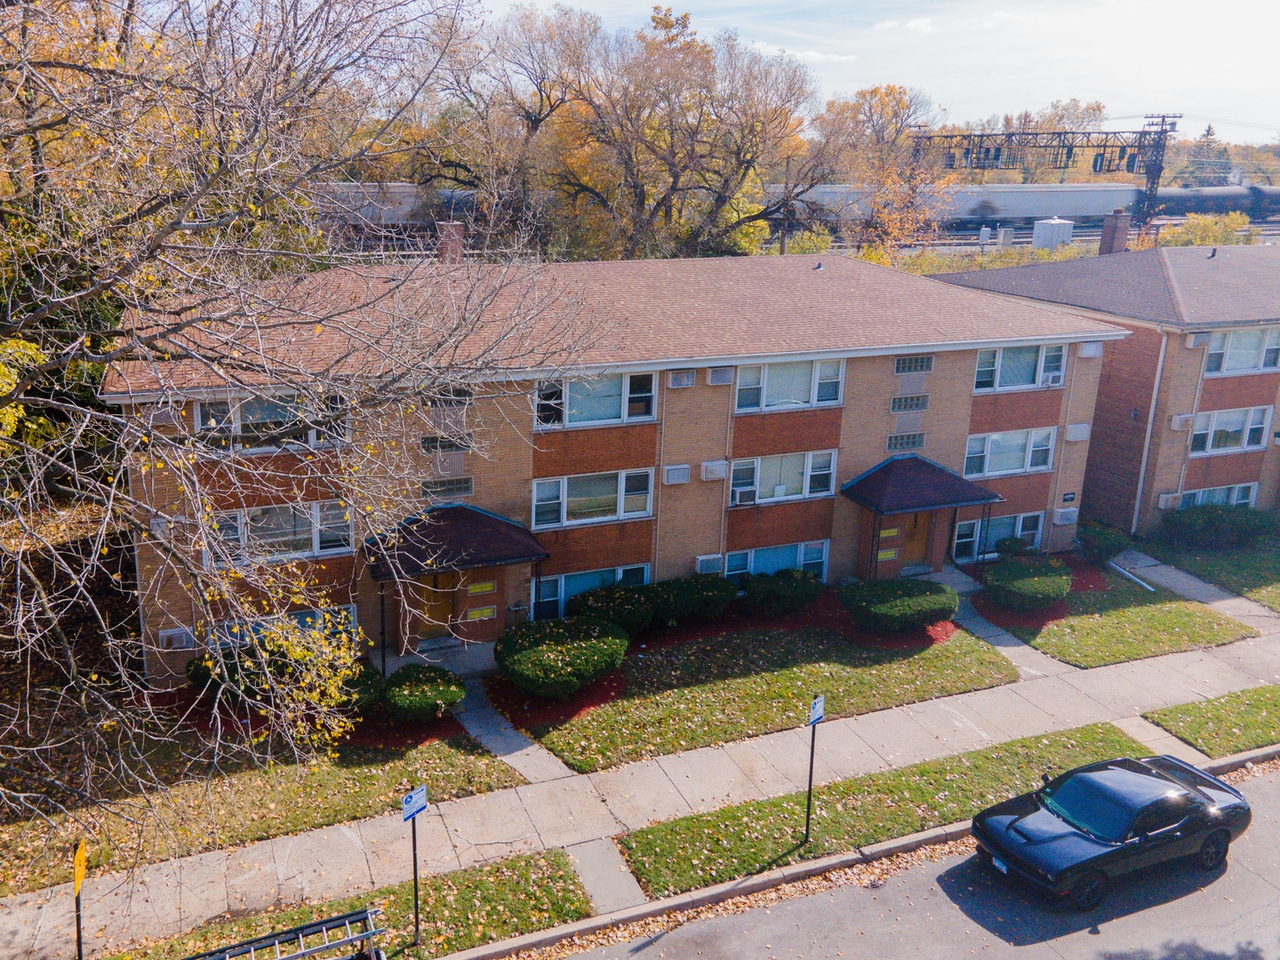 8935 S Dauphin Ave Apartments - 8935-39 S Dauphin Ave, Chicago, IL 60619